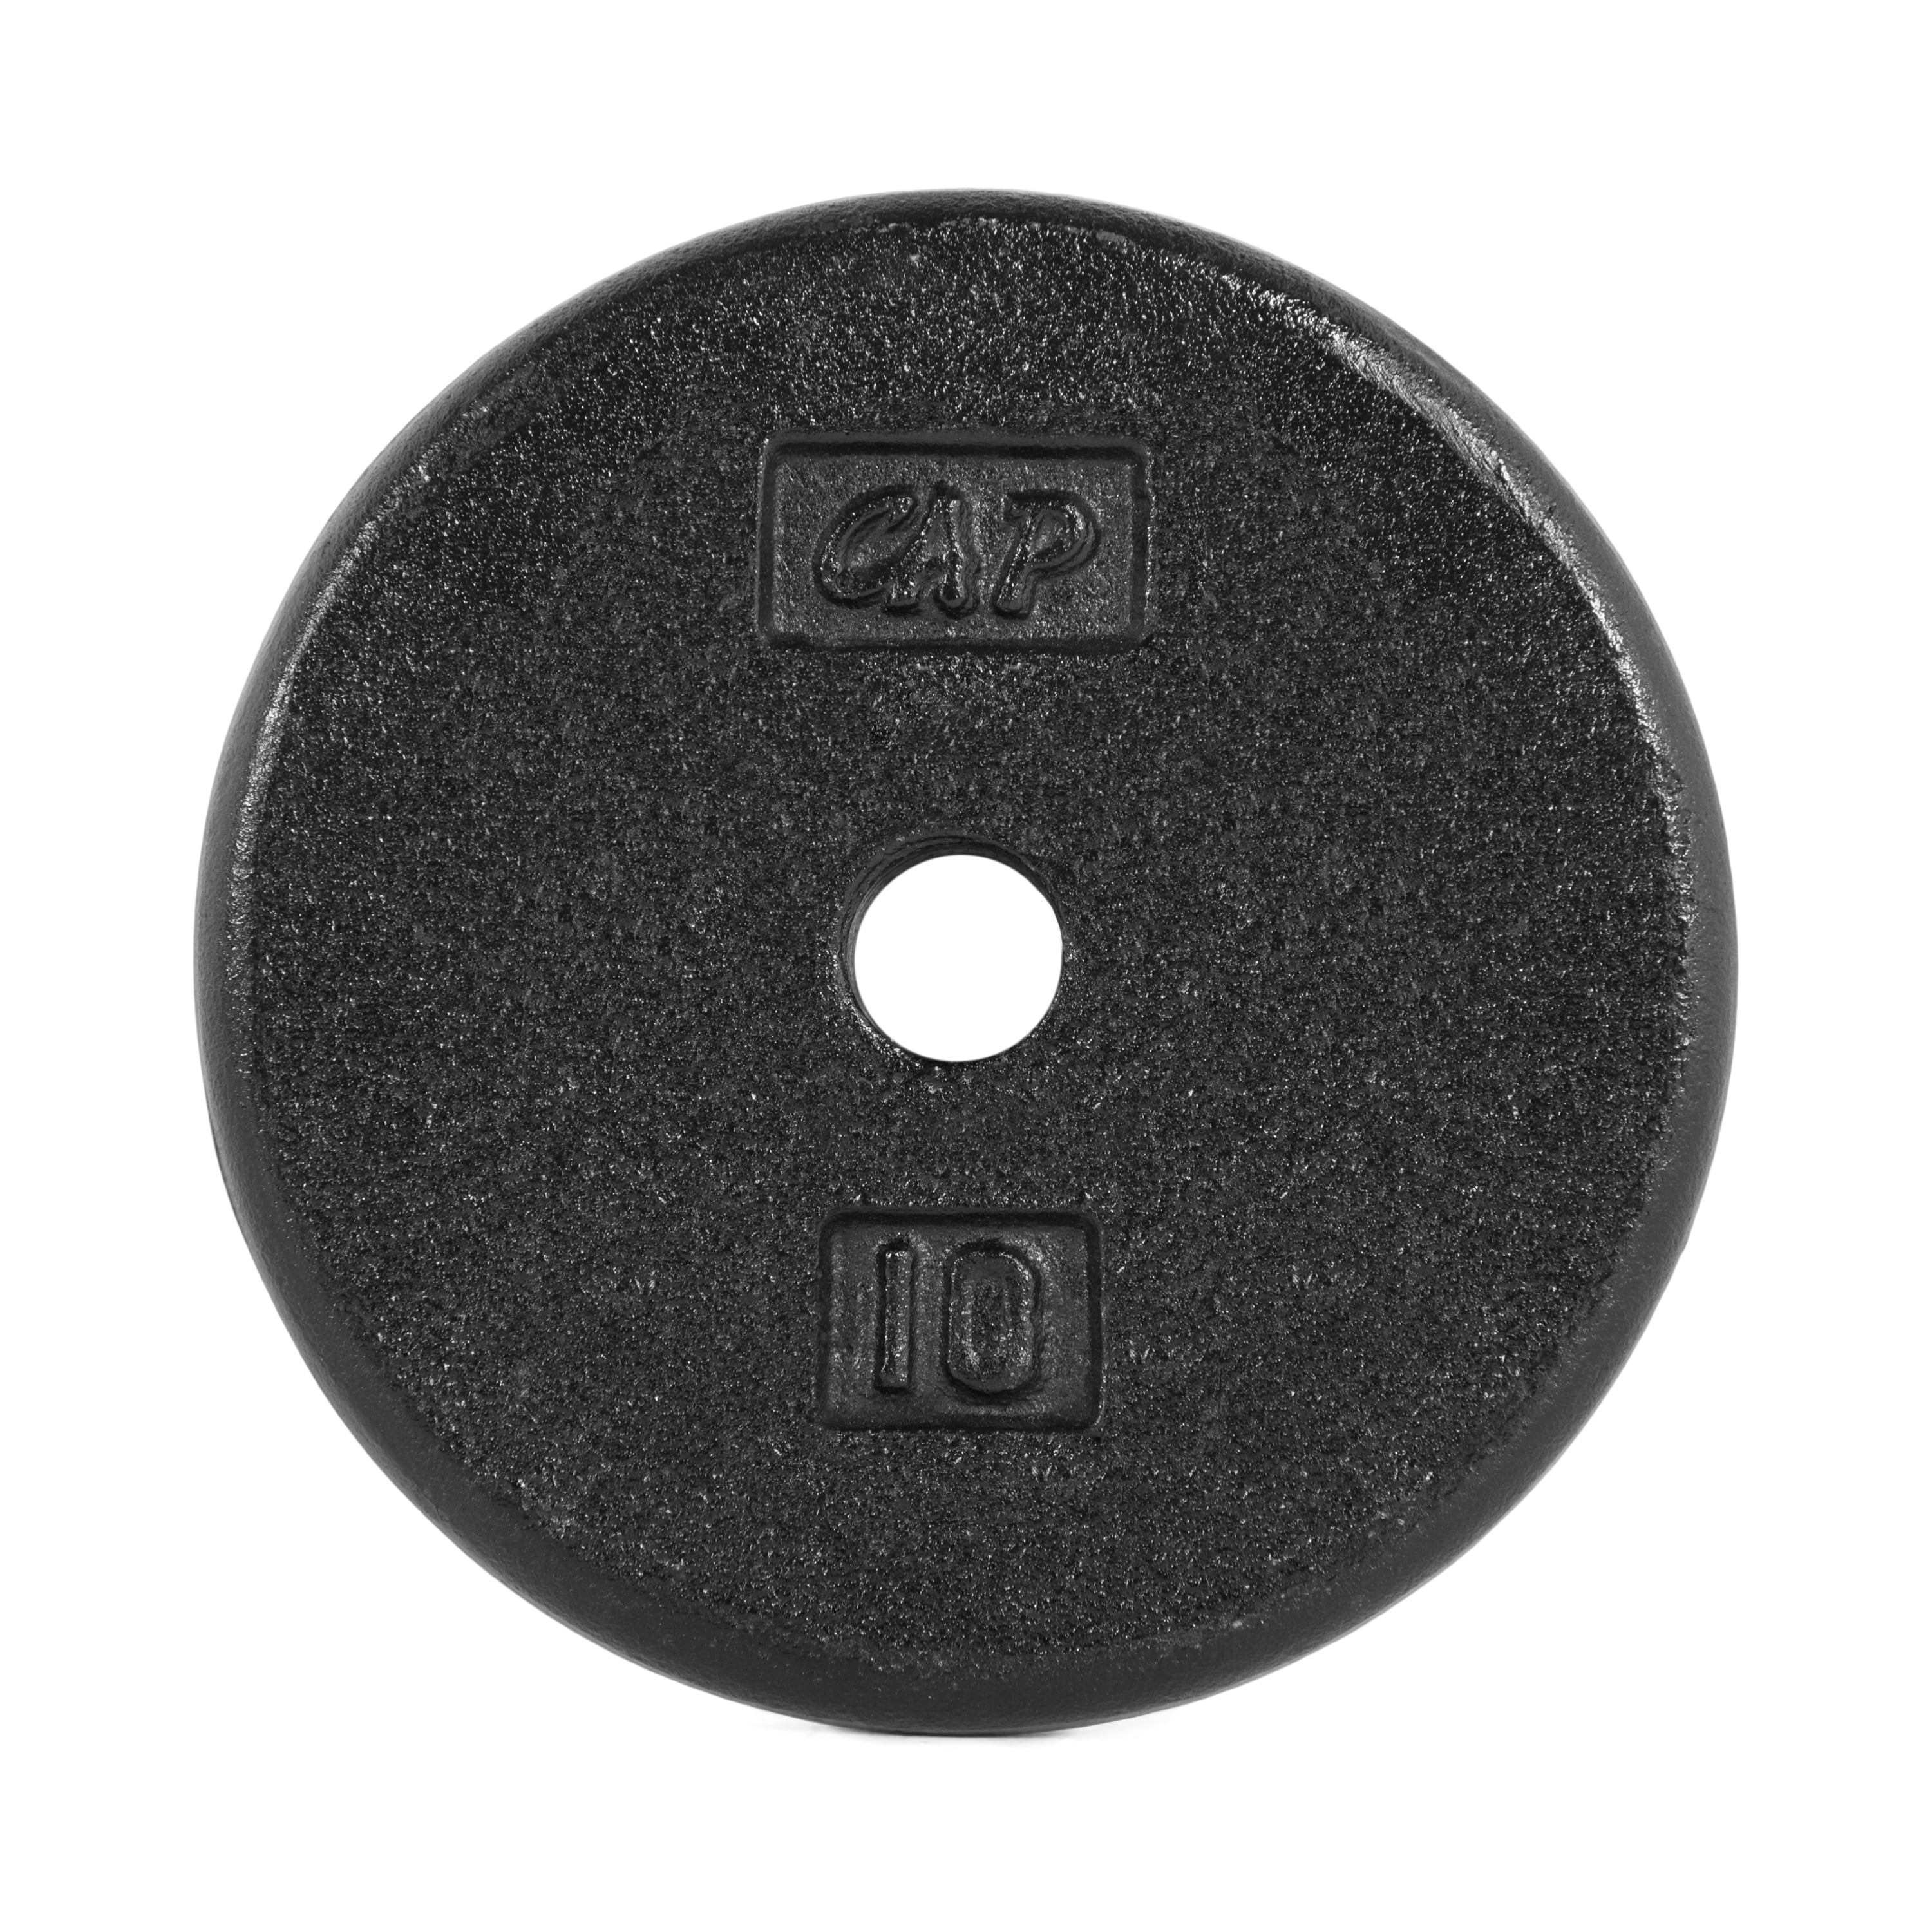 CAP Standard 1” Barbell Weight Plates 10 LB SET FREE SHIPPING 20 LBS TOTAL 